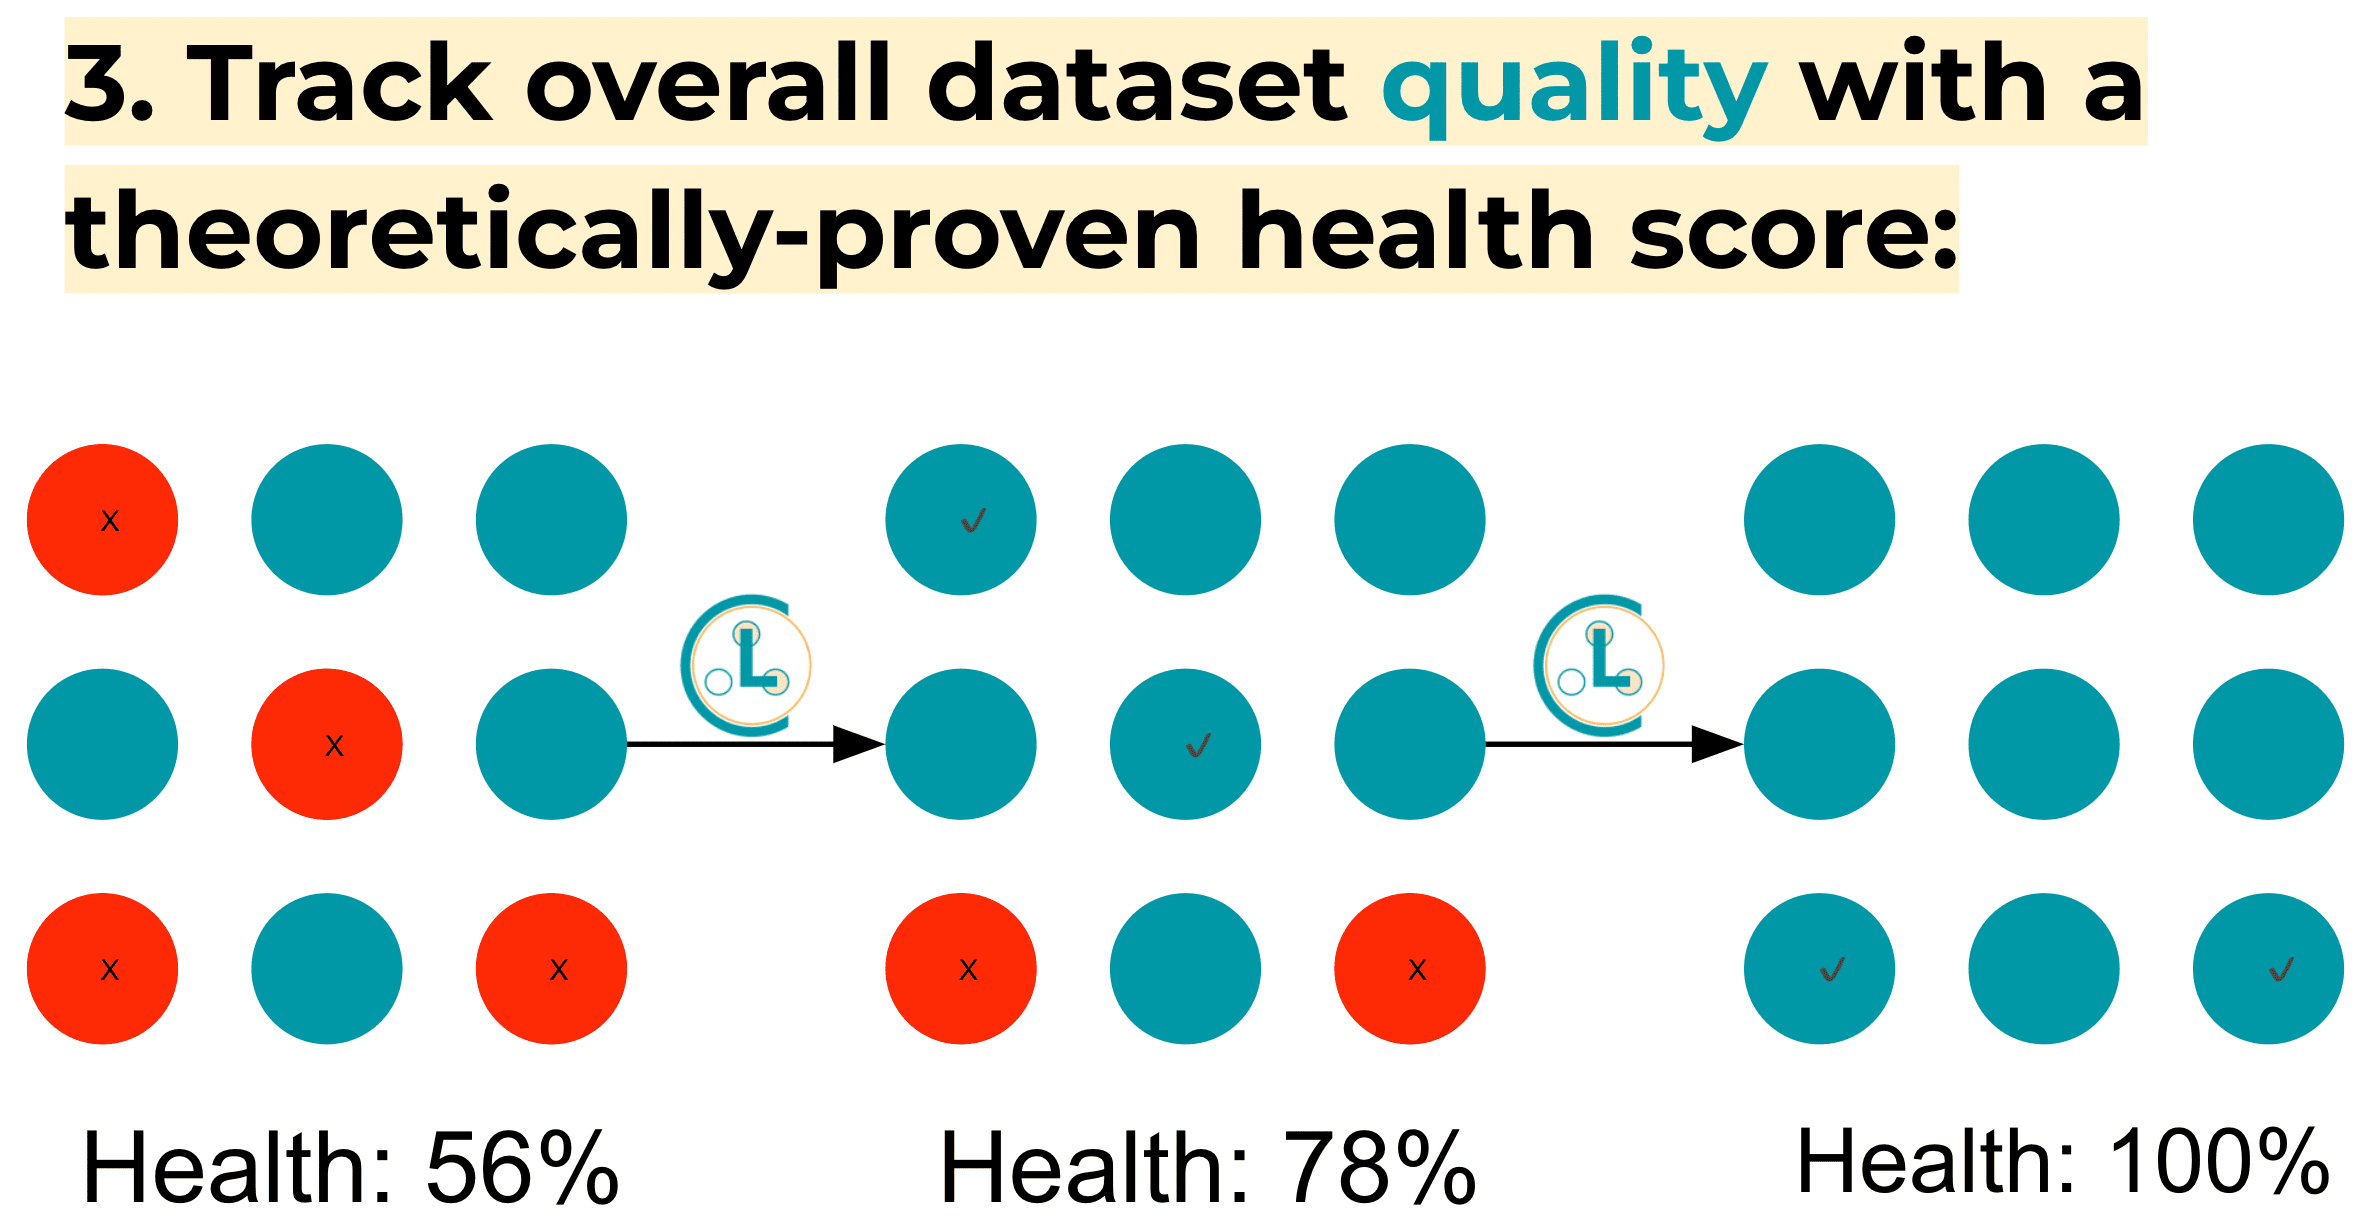 Track overall dataset quality with a theoretically-proven health score